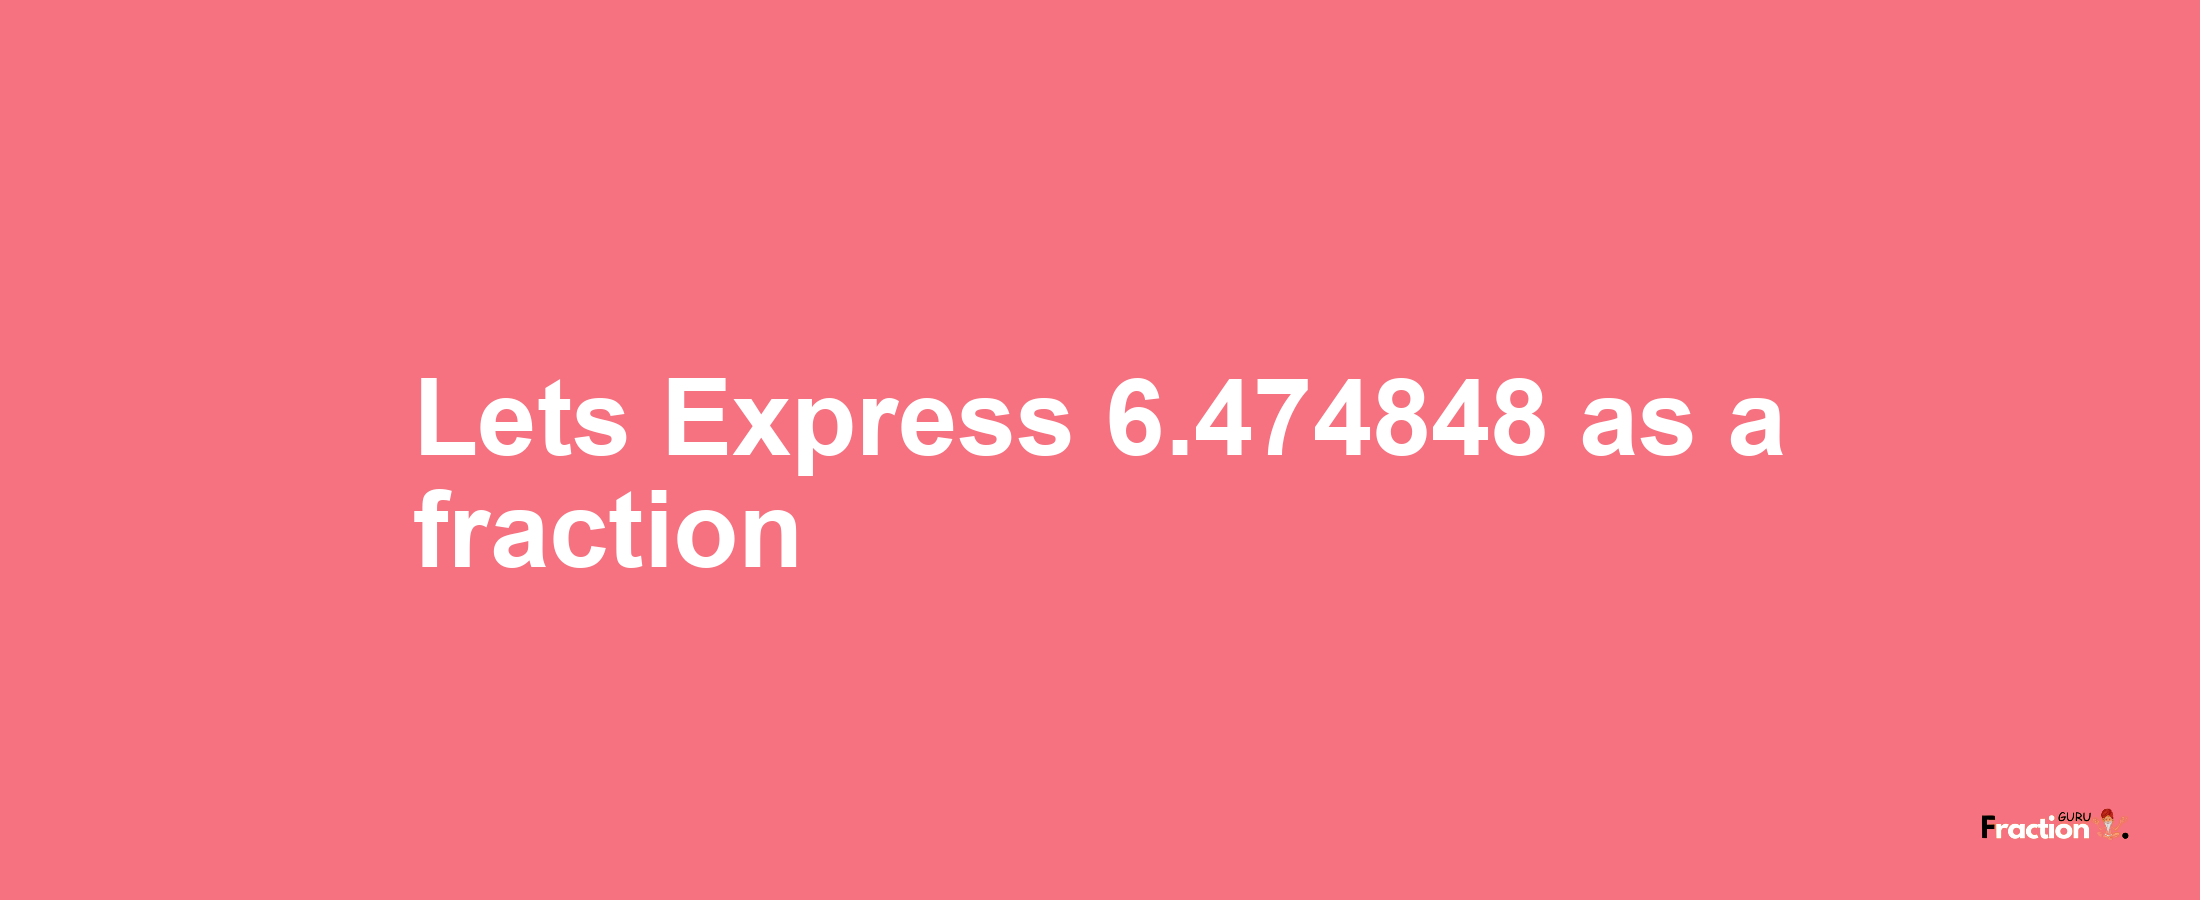 Lets Express 6.474848 as afraction